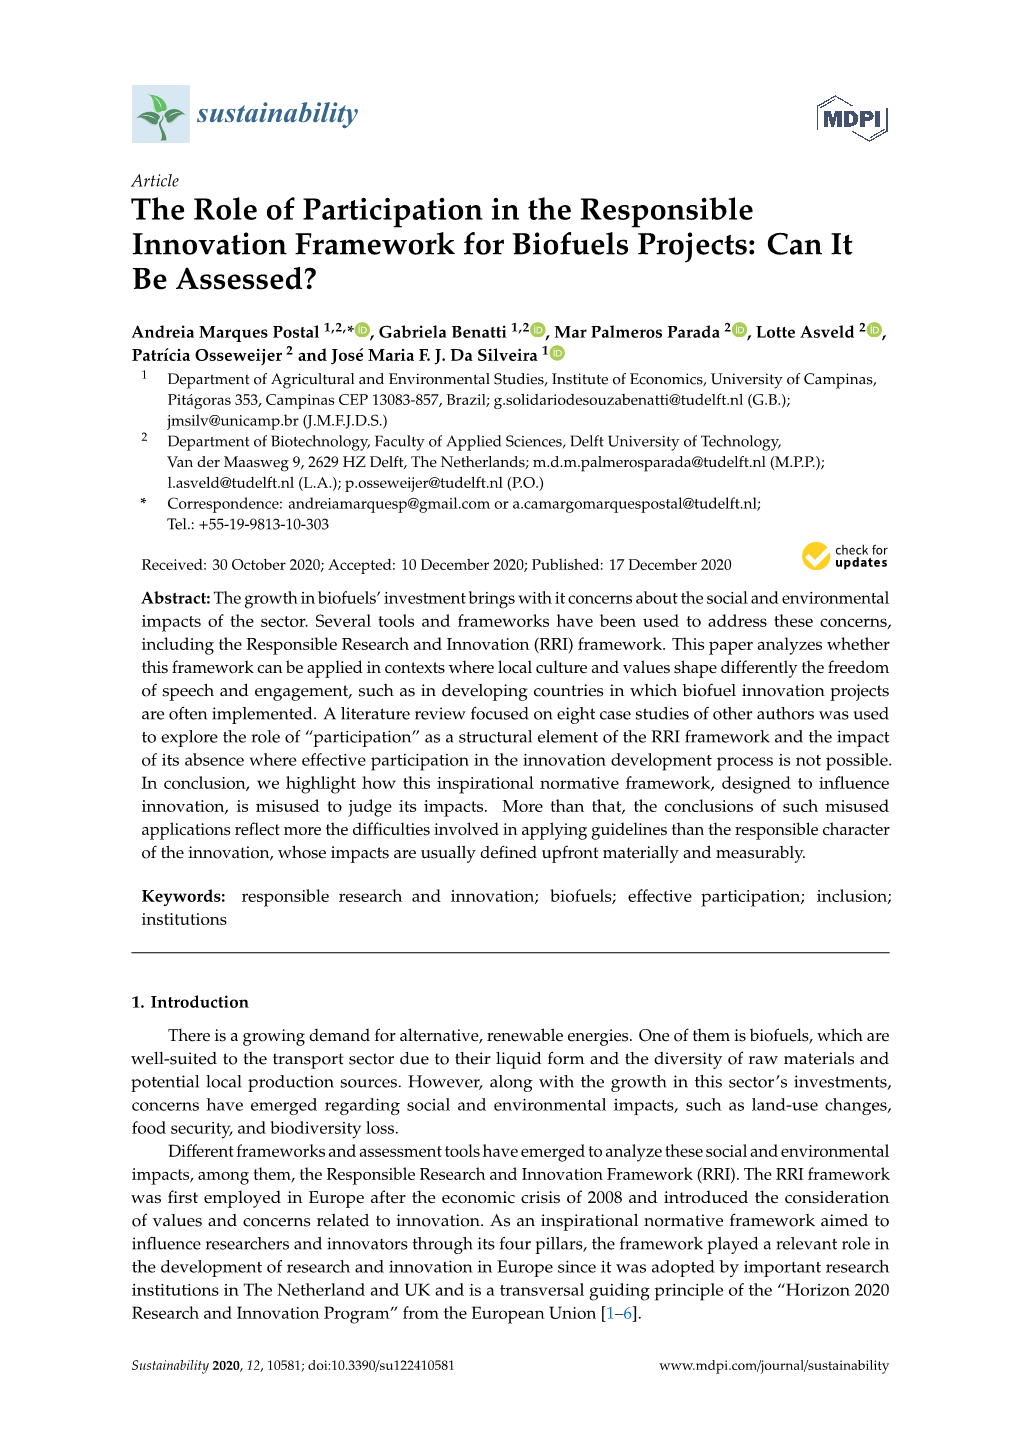 The Role of Participation in the Responsible Innovation Framework for Biofuels Projects: Can It Be Assessed?